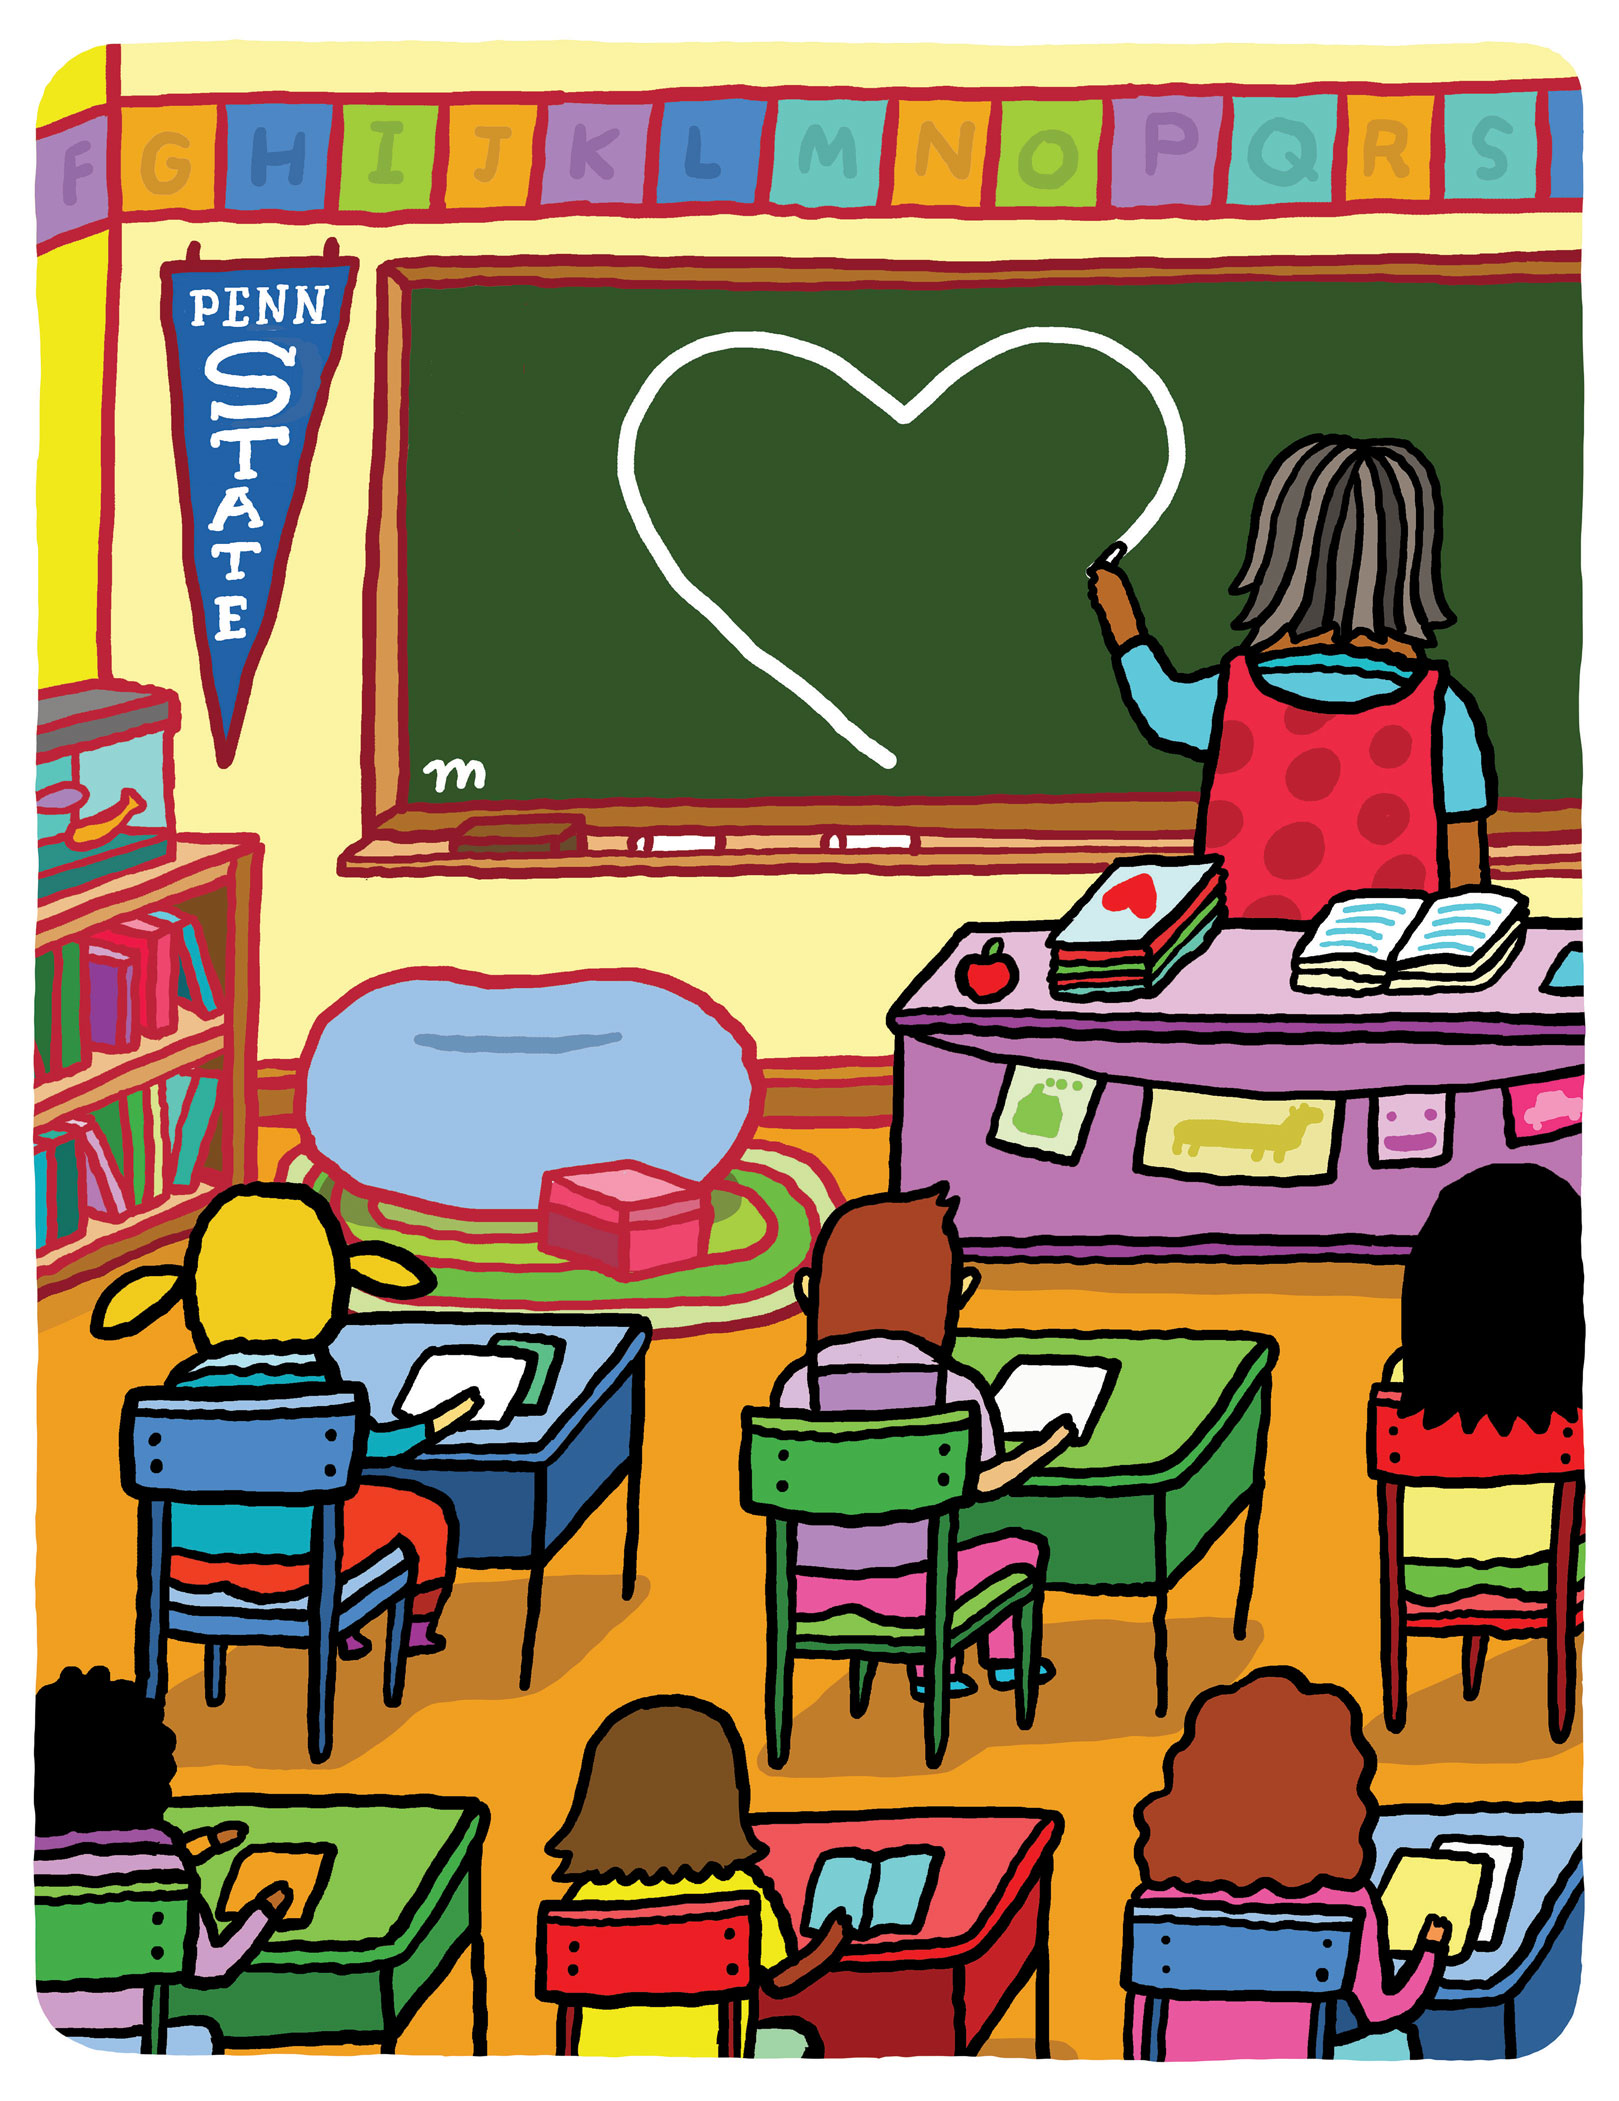 illustration of a teacher in a classroom drawing a heart on a chalkboard in front of small children sitting at desks, by Aaron Meshon